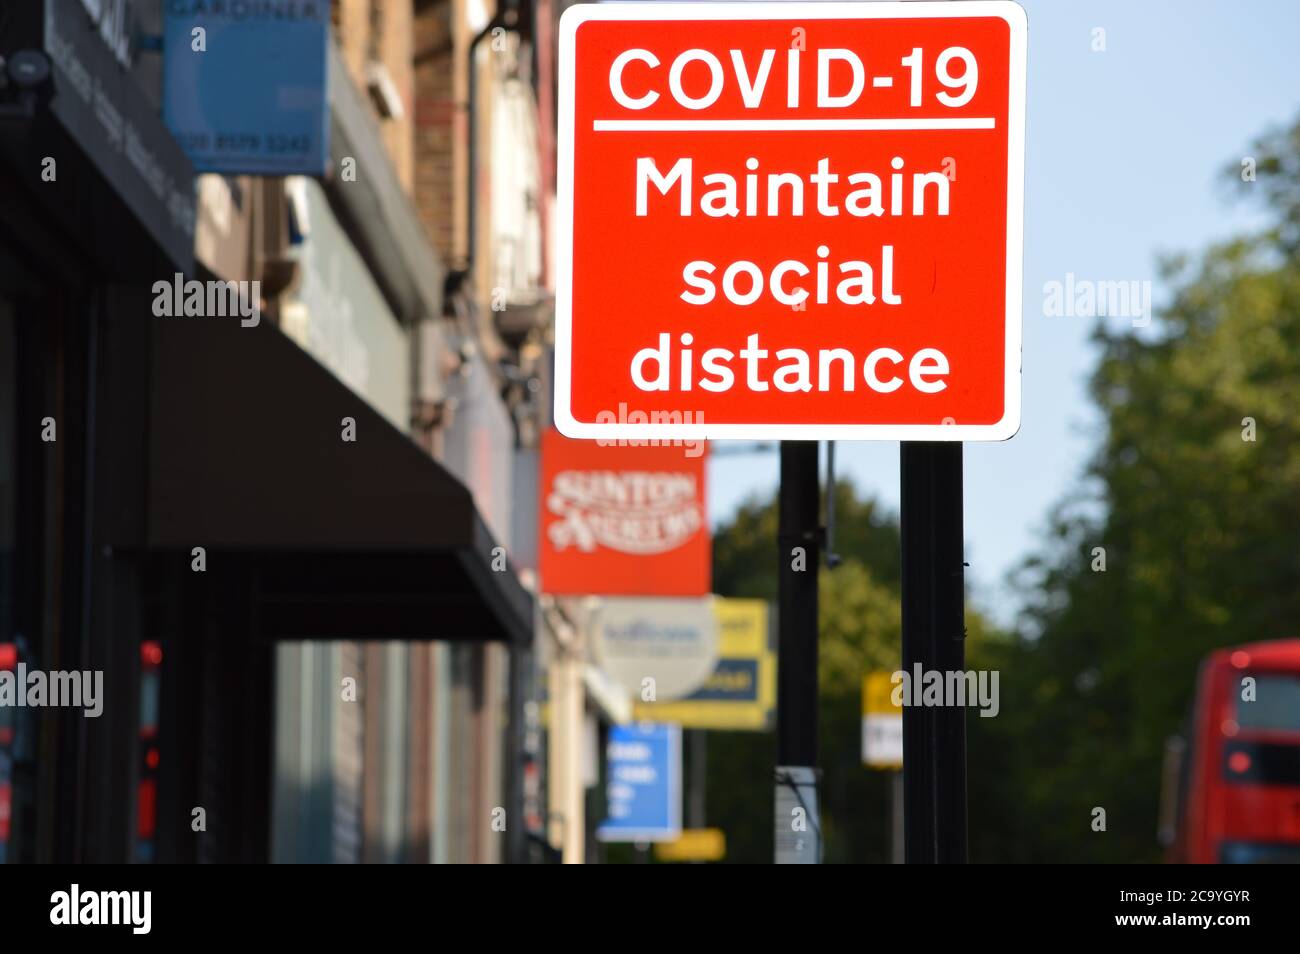 London, UK. 3 August 2020. A COVID-19 maintain social distance notice lamp posted, warning the general public that this measure should be followed. Stock Photo